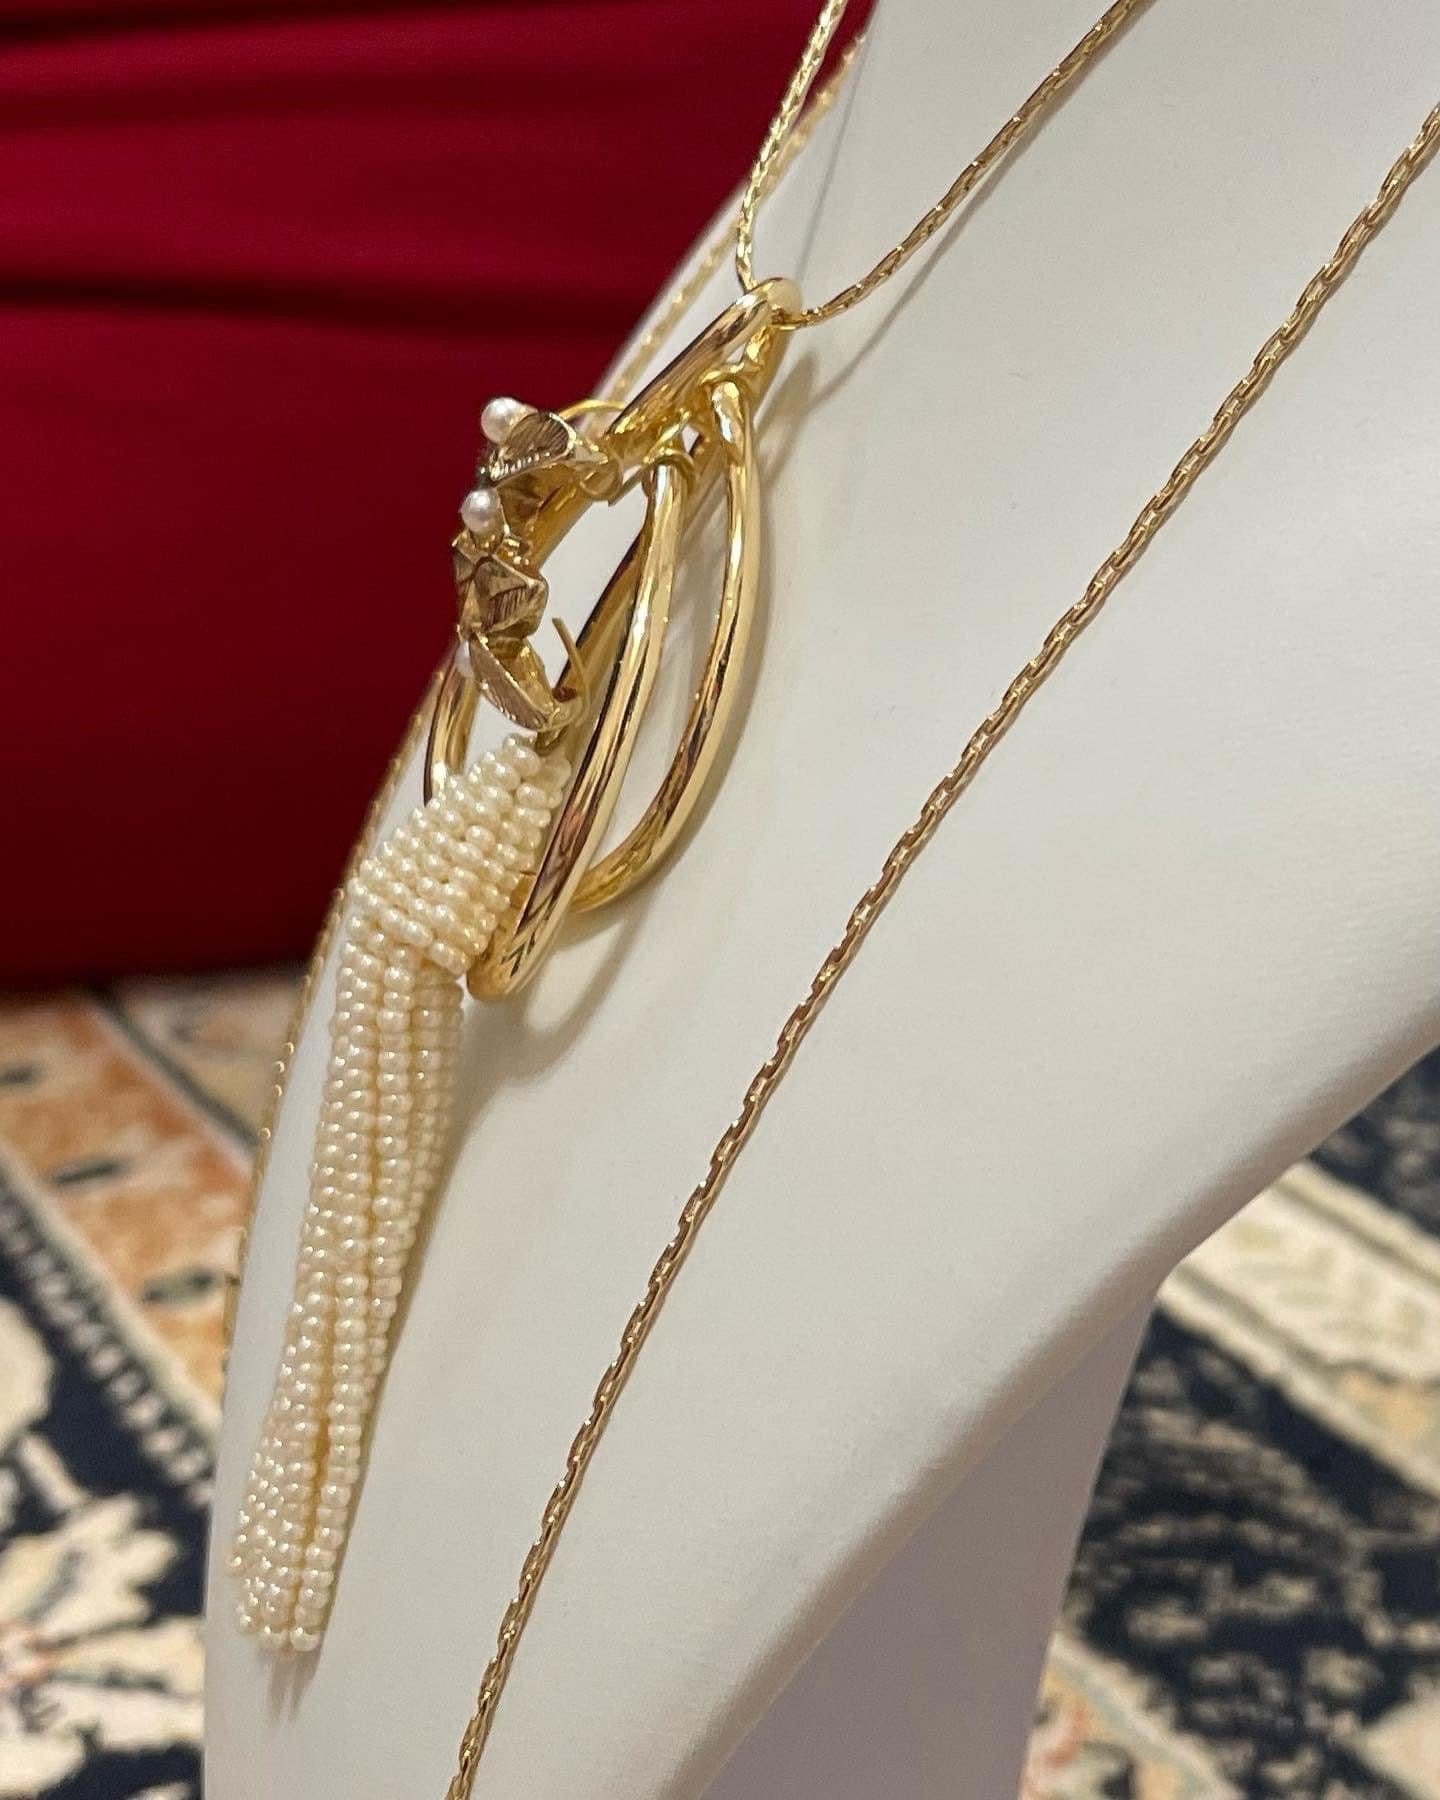 Gold color chain with beautiful pendant